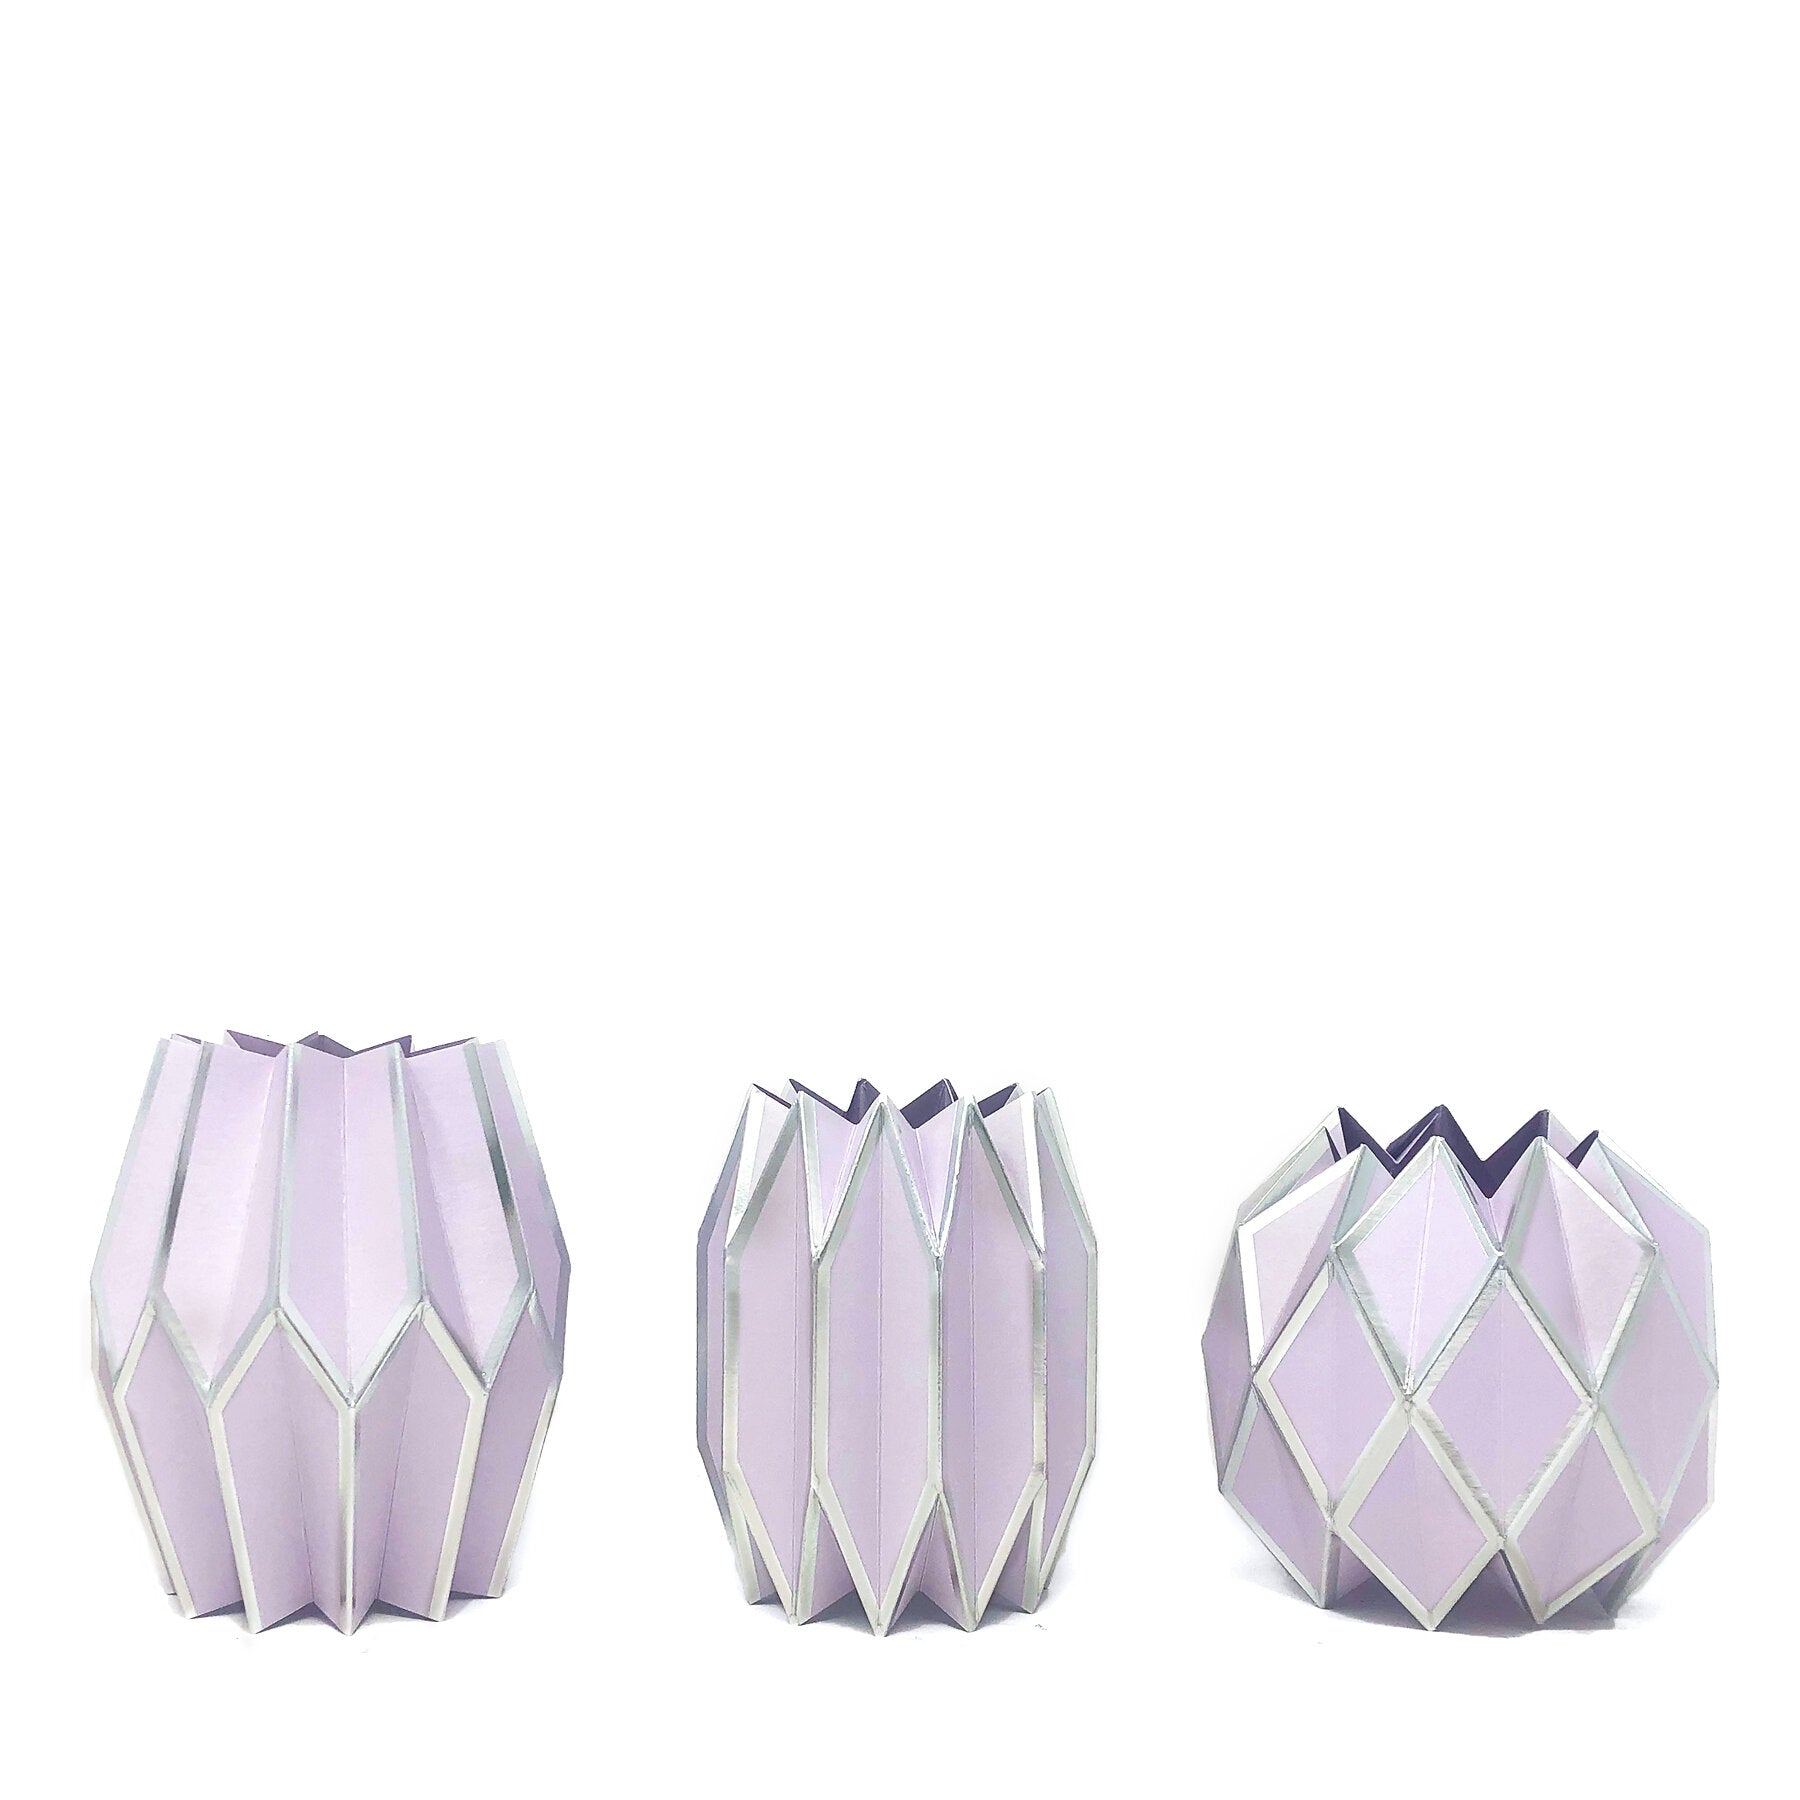 Silver Paper Vase Wraps by Lucy Grymes